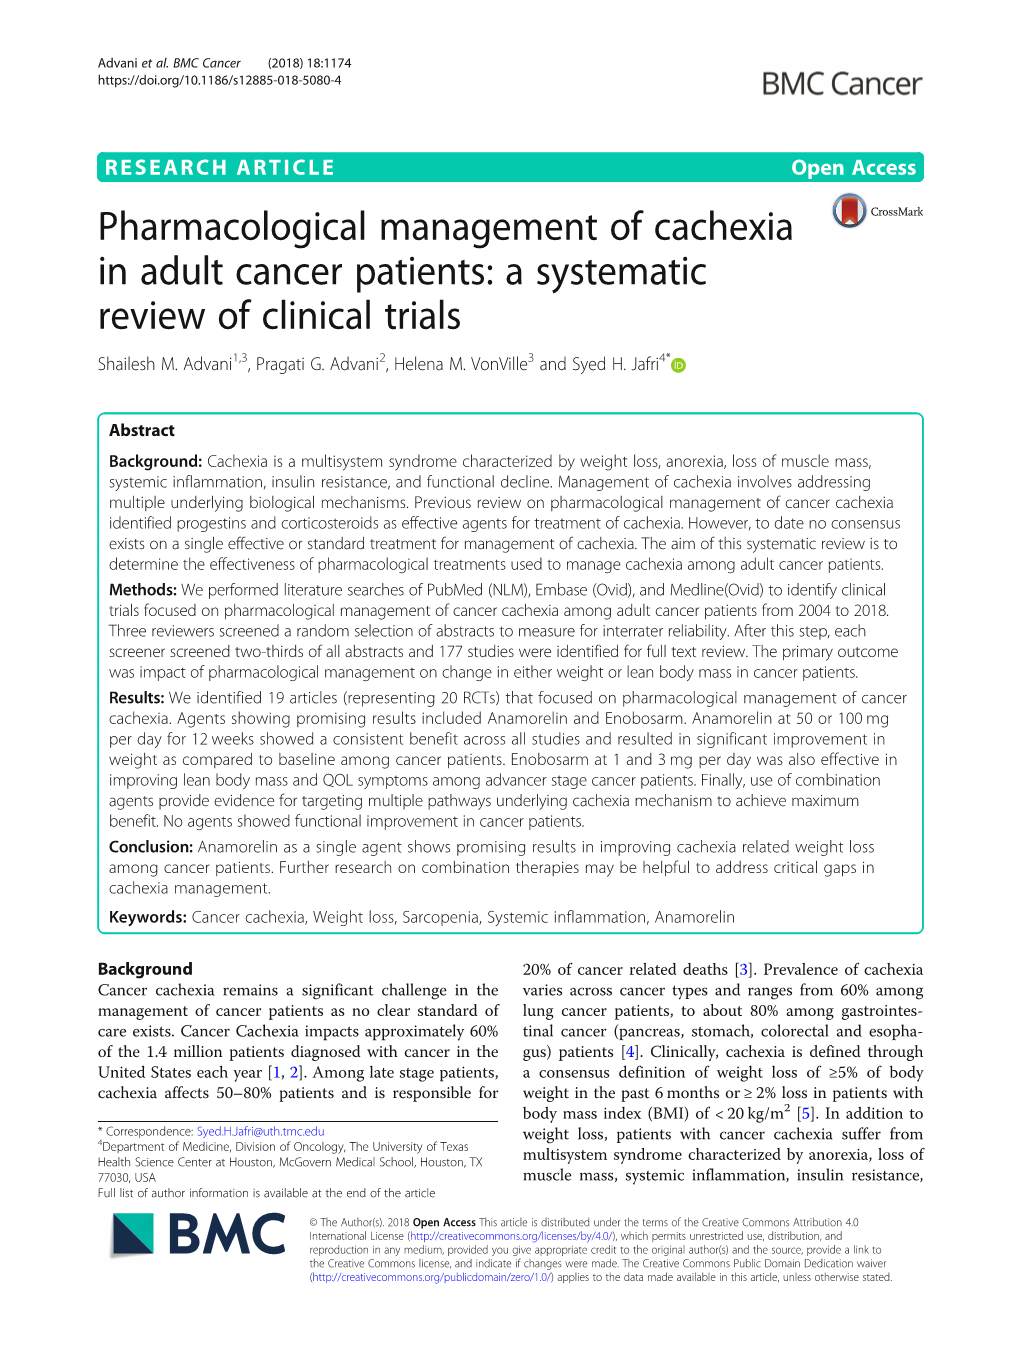 Pharmacological Management of Cachexia in Adult Cancer Patients: a Systematic Review of Clinical Trials Shailesh M